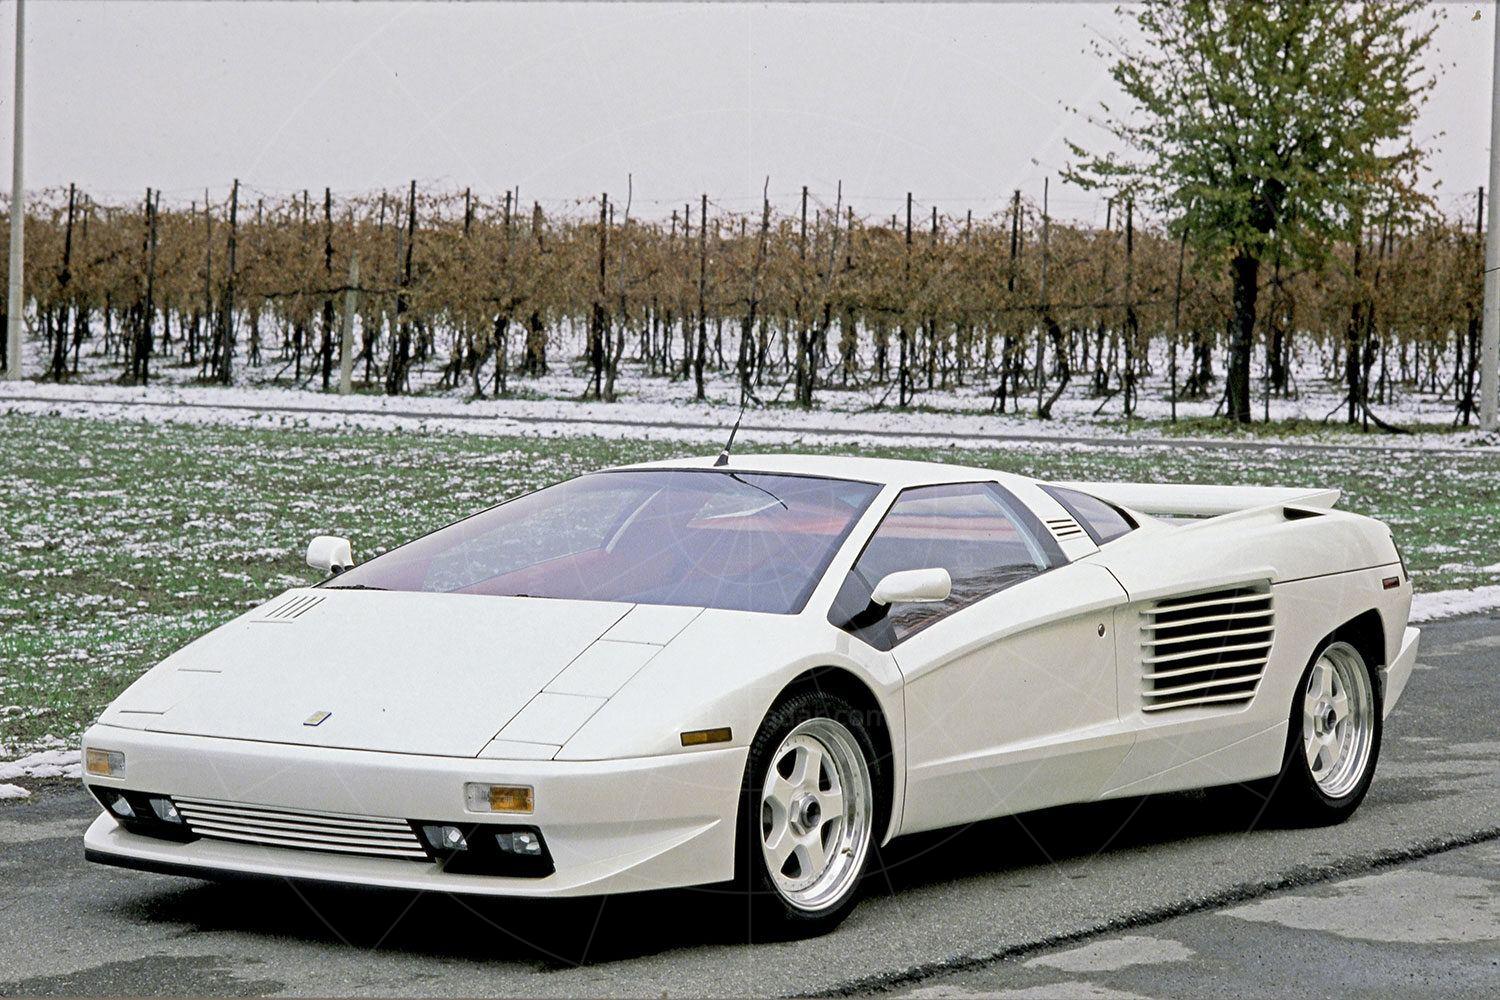 The first Cizeta V16T prototype Pic: magiccarpics.co.uk | The first Cizeta V16T prototype